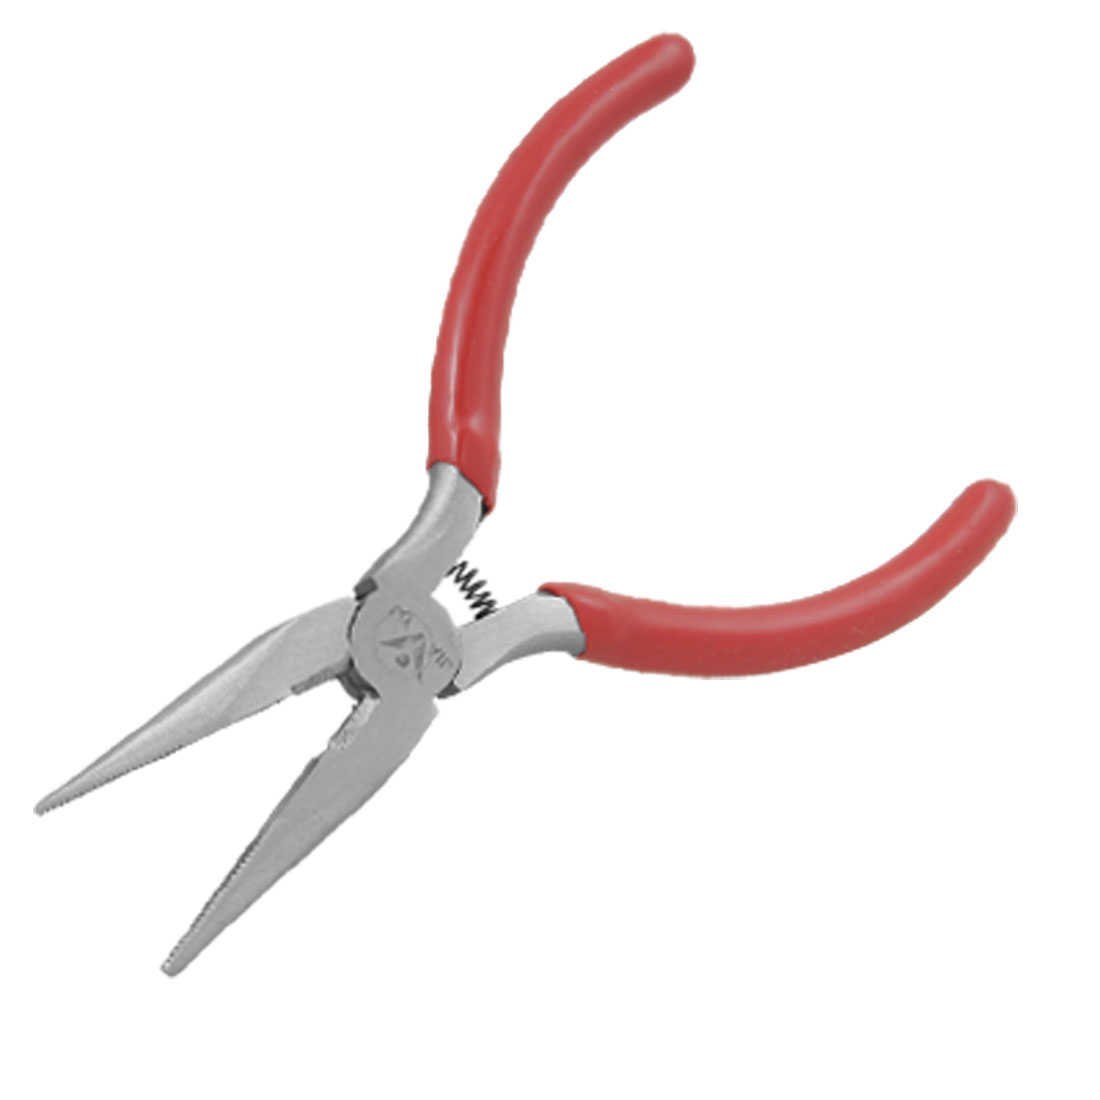 Unique Bargains Circlip Snipe-nose Pliers Electrical Wire Hand Tool